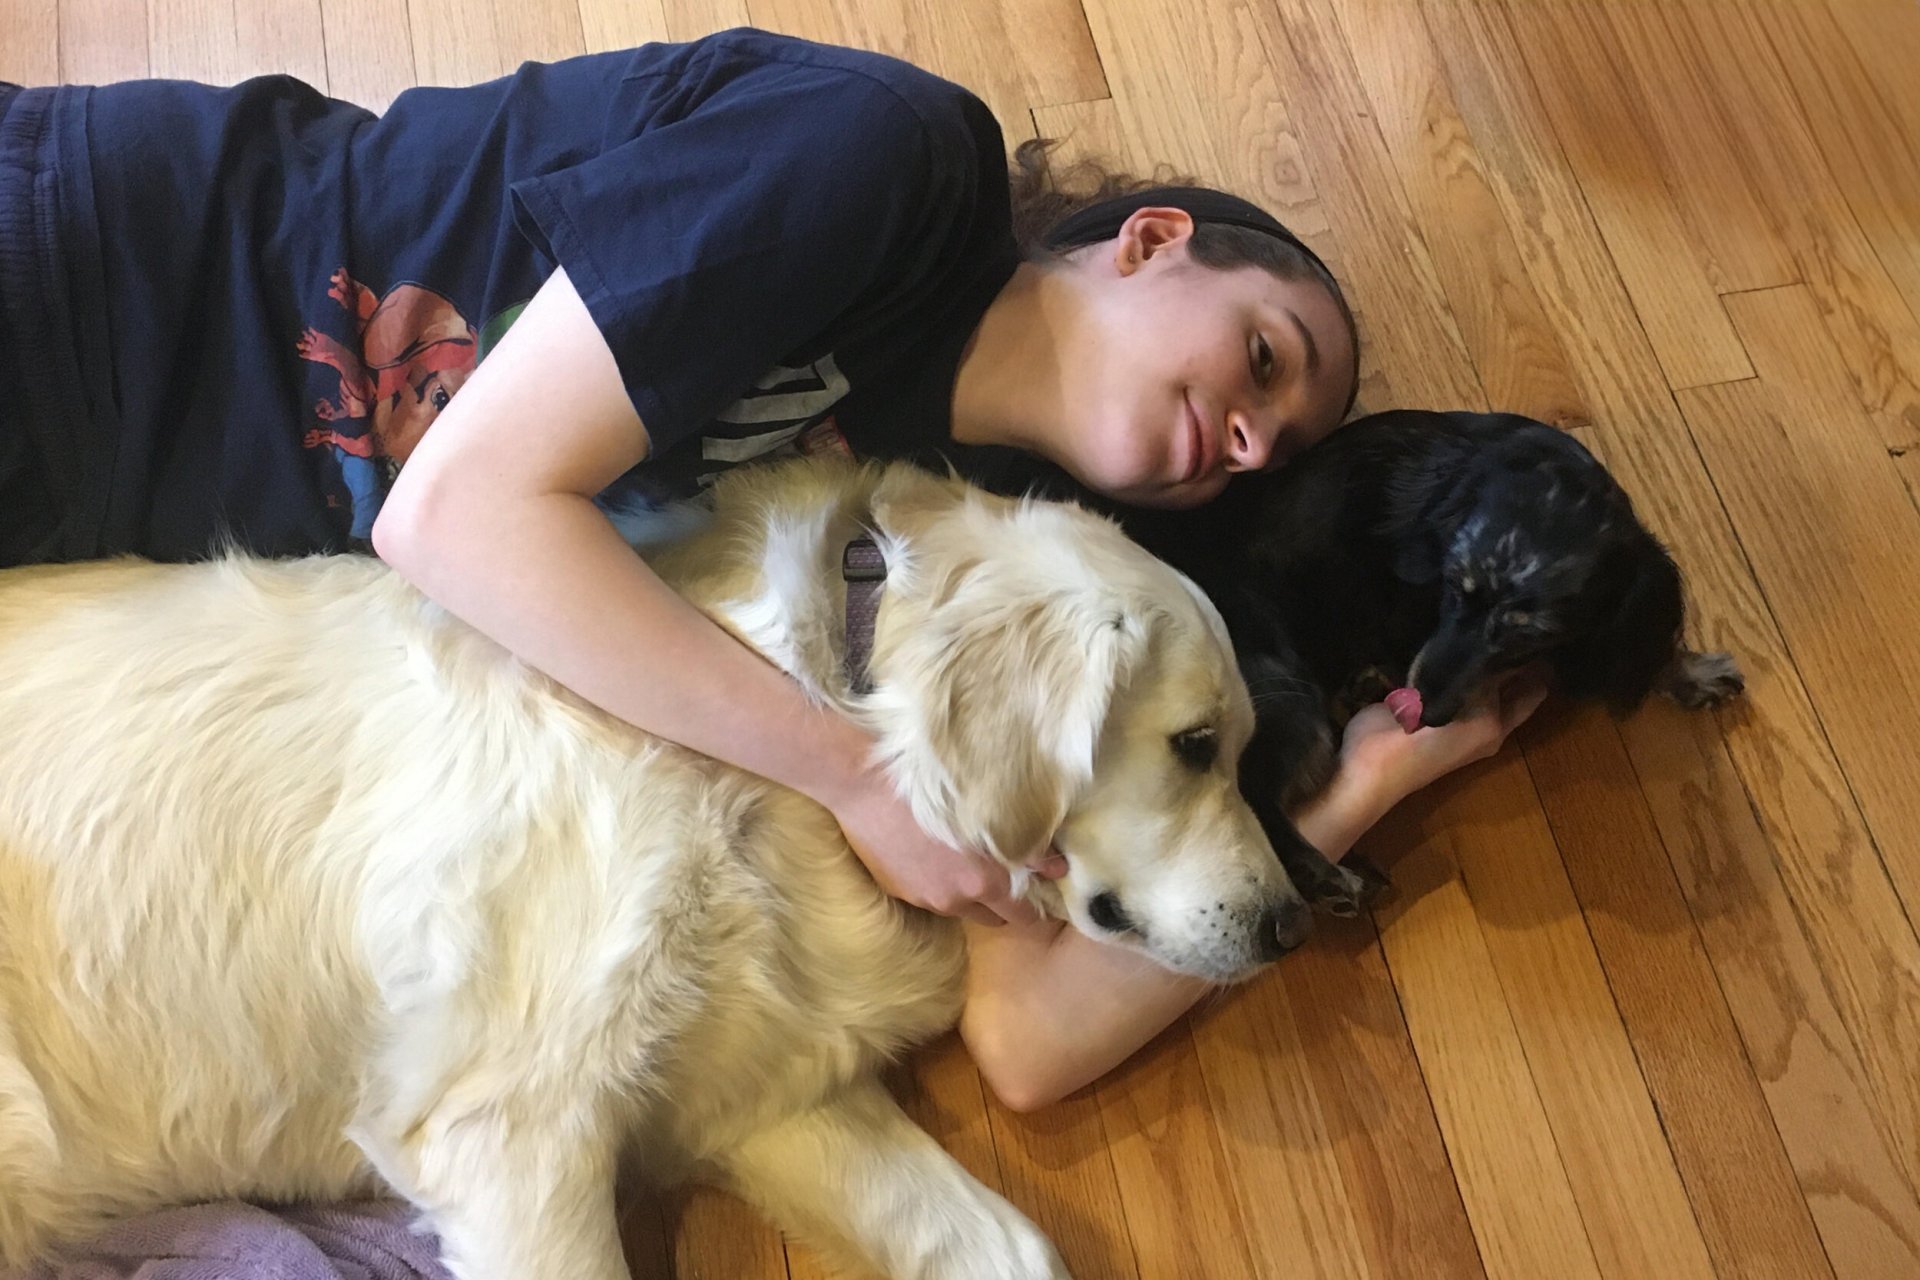 Student cuddling with two dogs on wooden floor